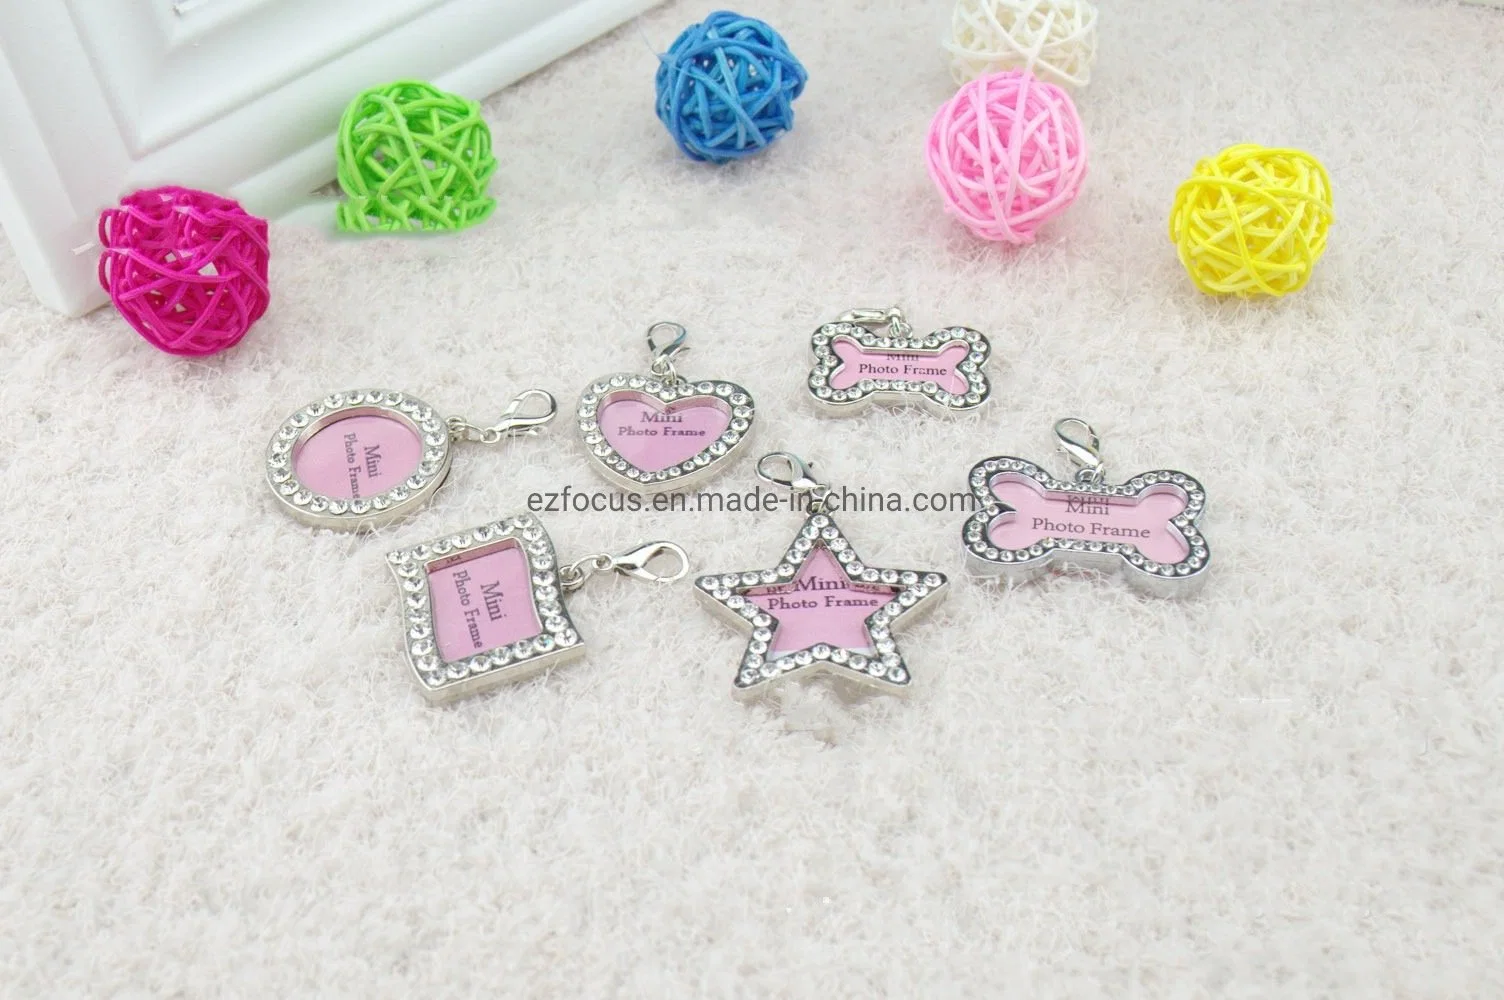 Crystal Bling Cat Dog ID Tag Pet Stainless Steel Personalized ID Frame Photo Frame Tag Wbb16517